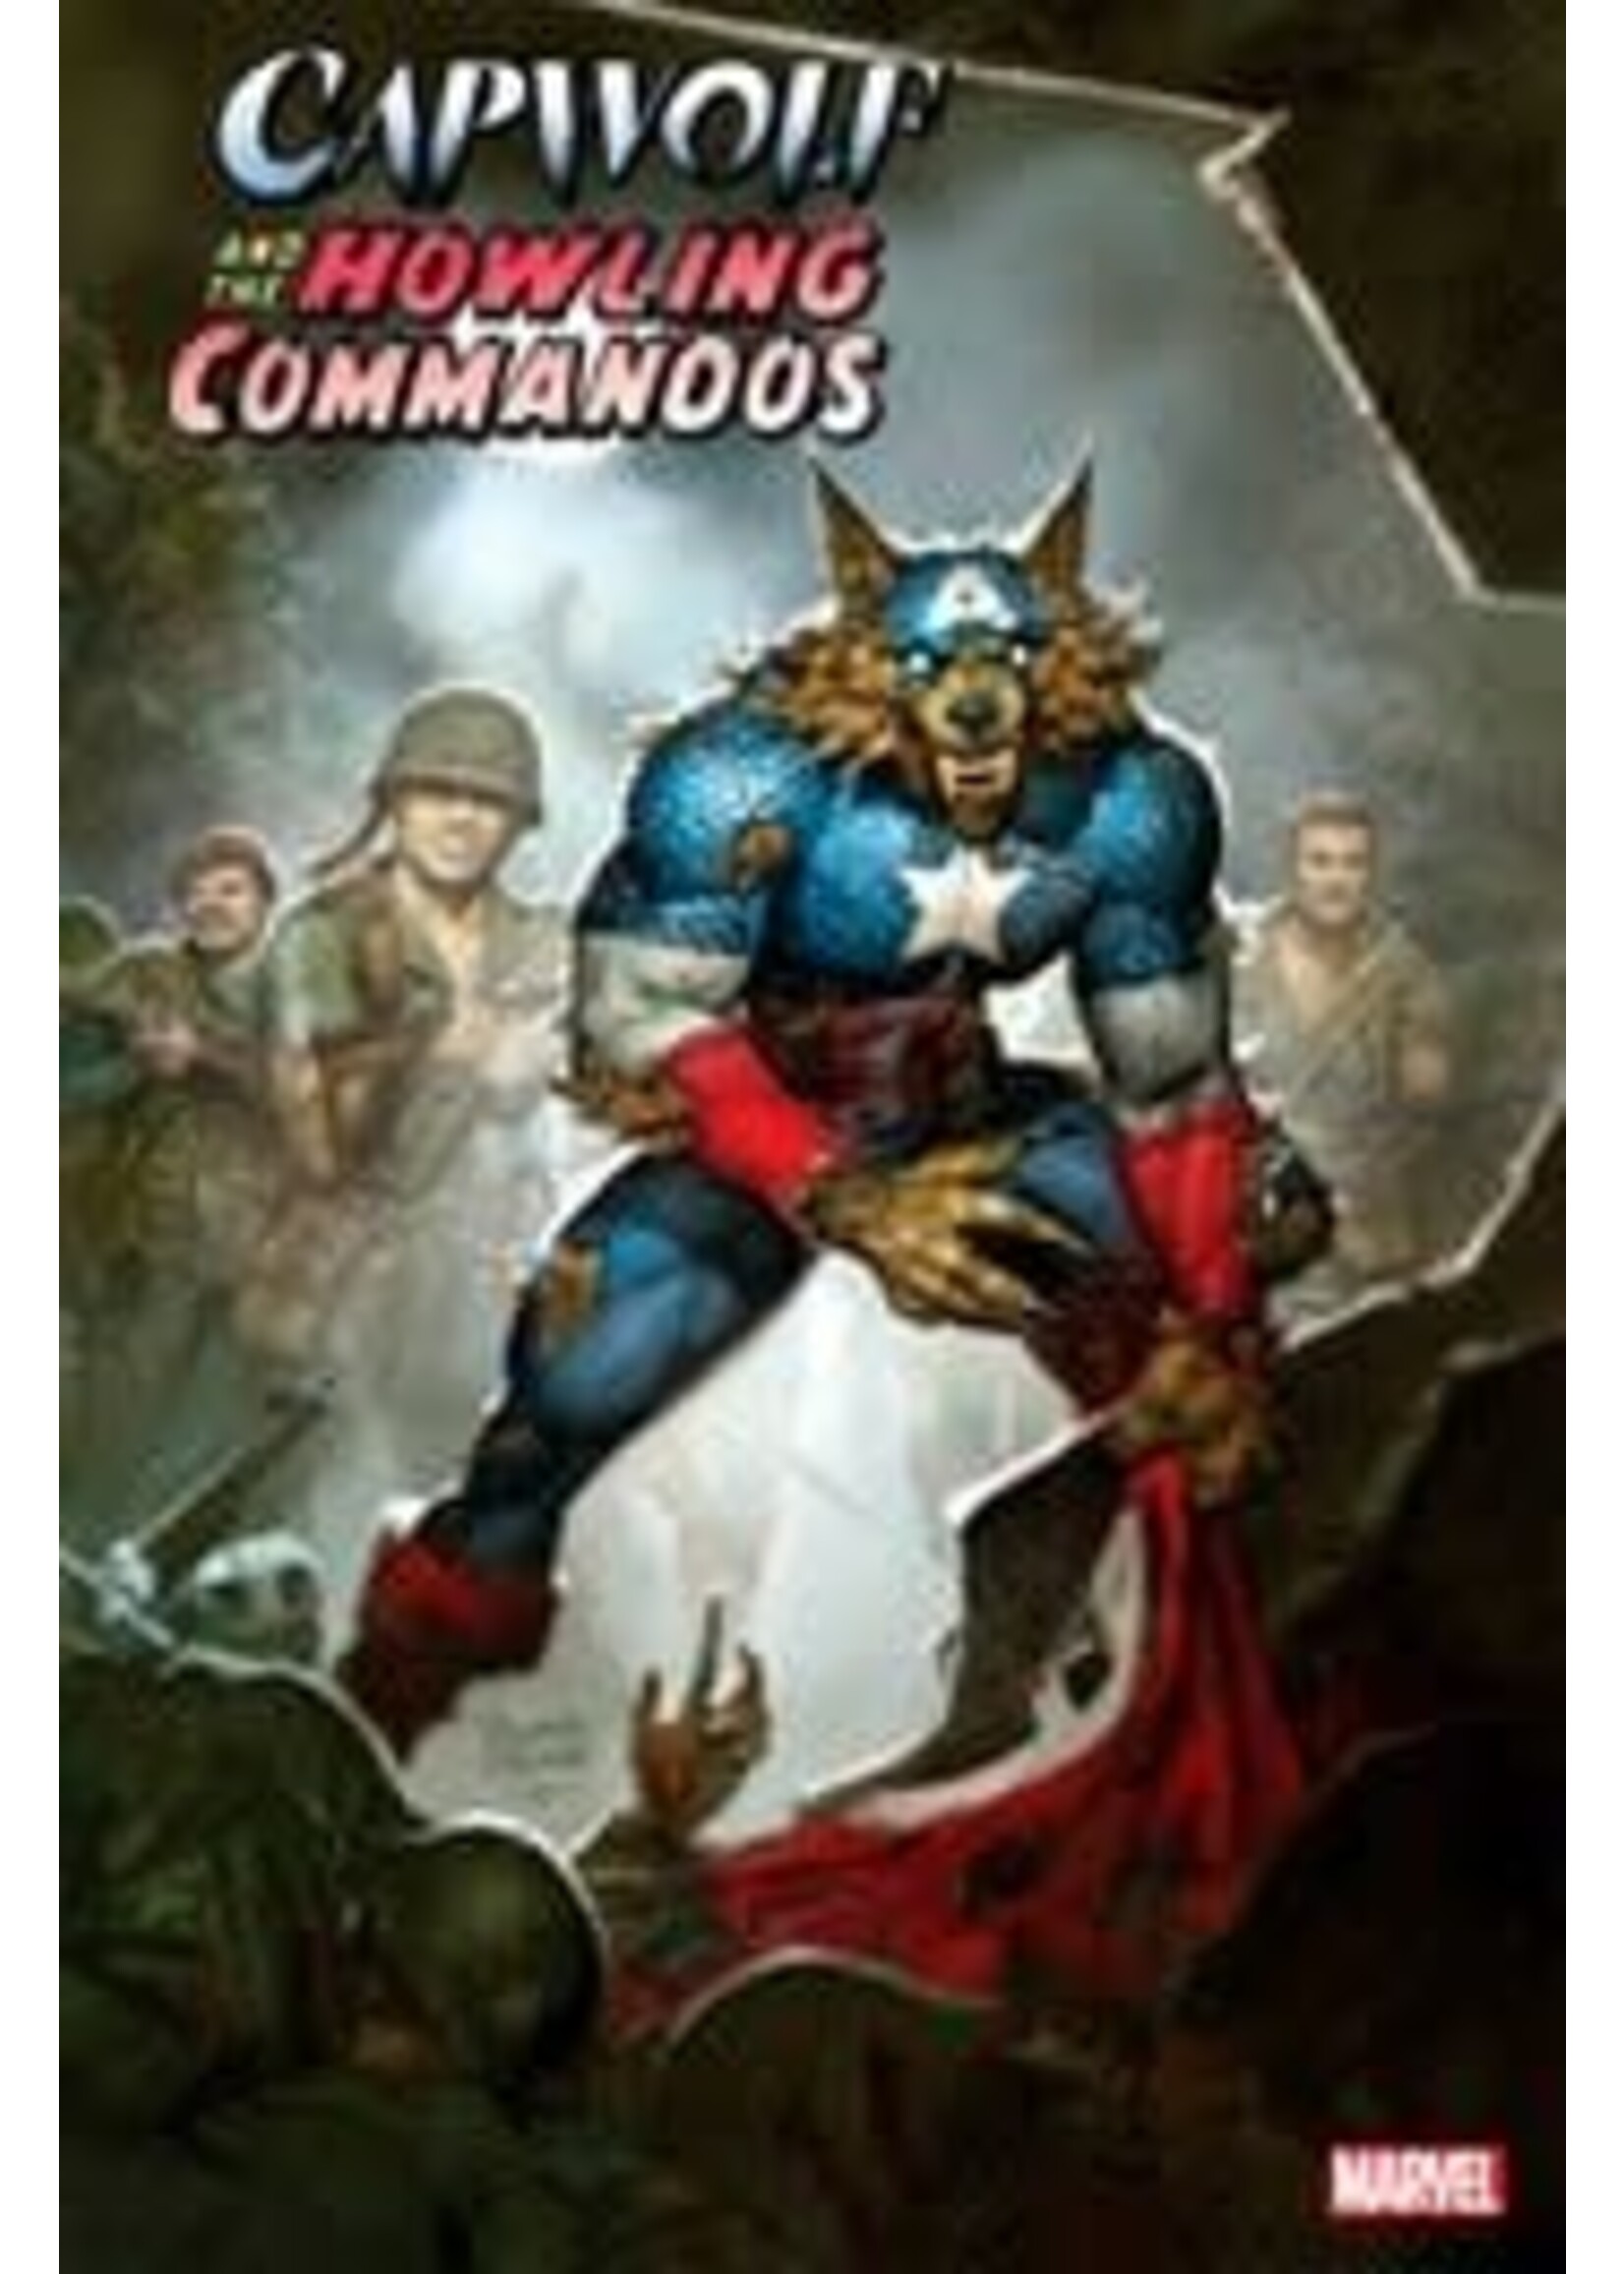 MARVEL COMICS CAPWOLF AND THE HOWLING COMMANDOS complete 4 issue series